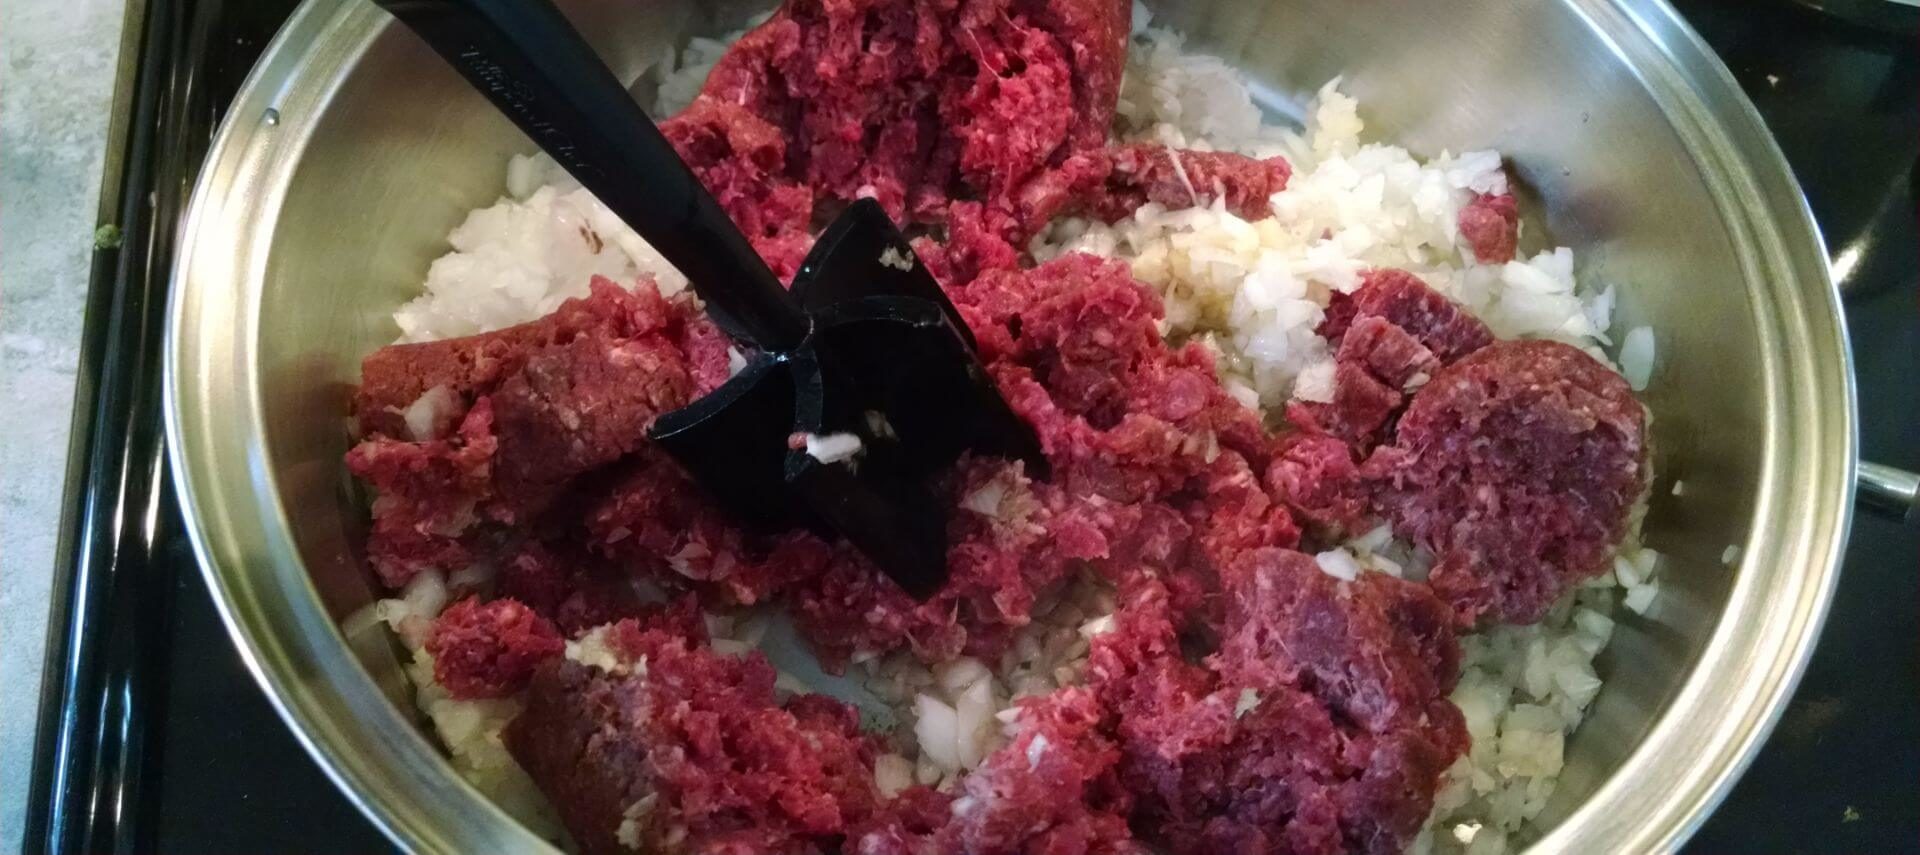 Ground Beef with Onion being Browned in a Stainless Steel Pan